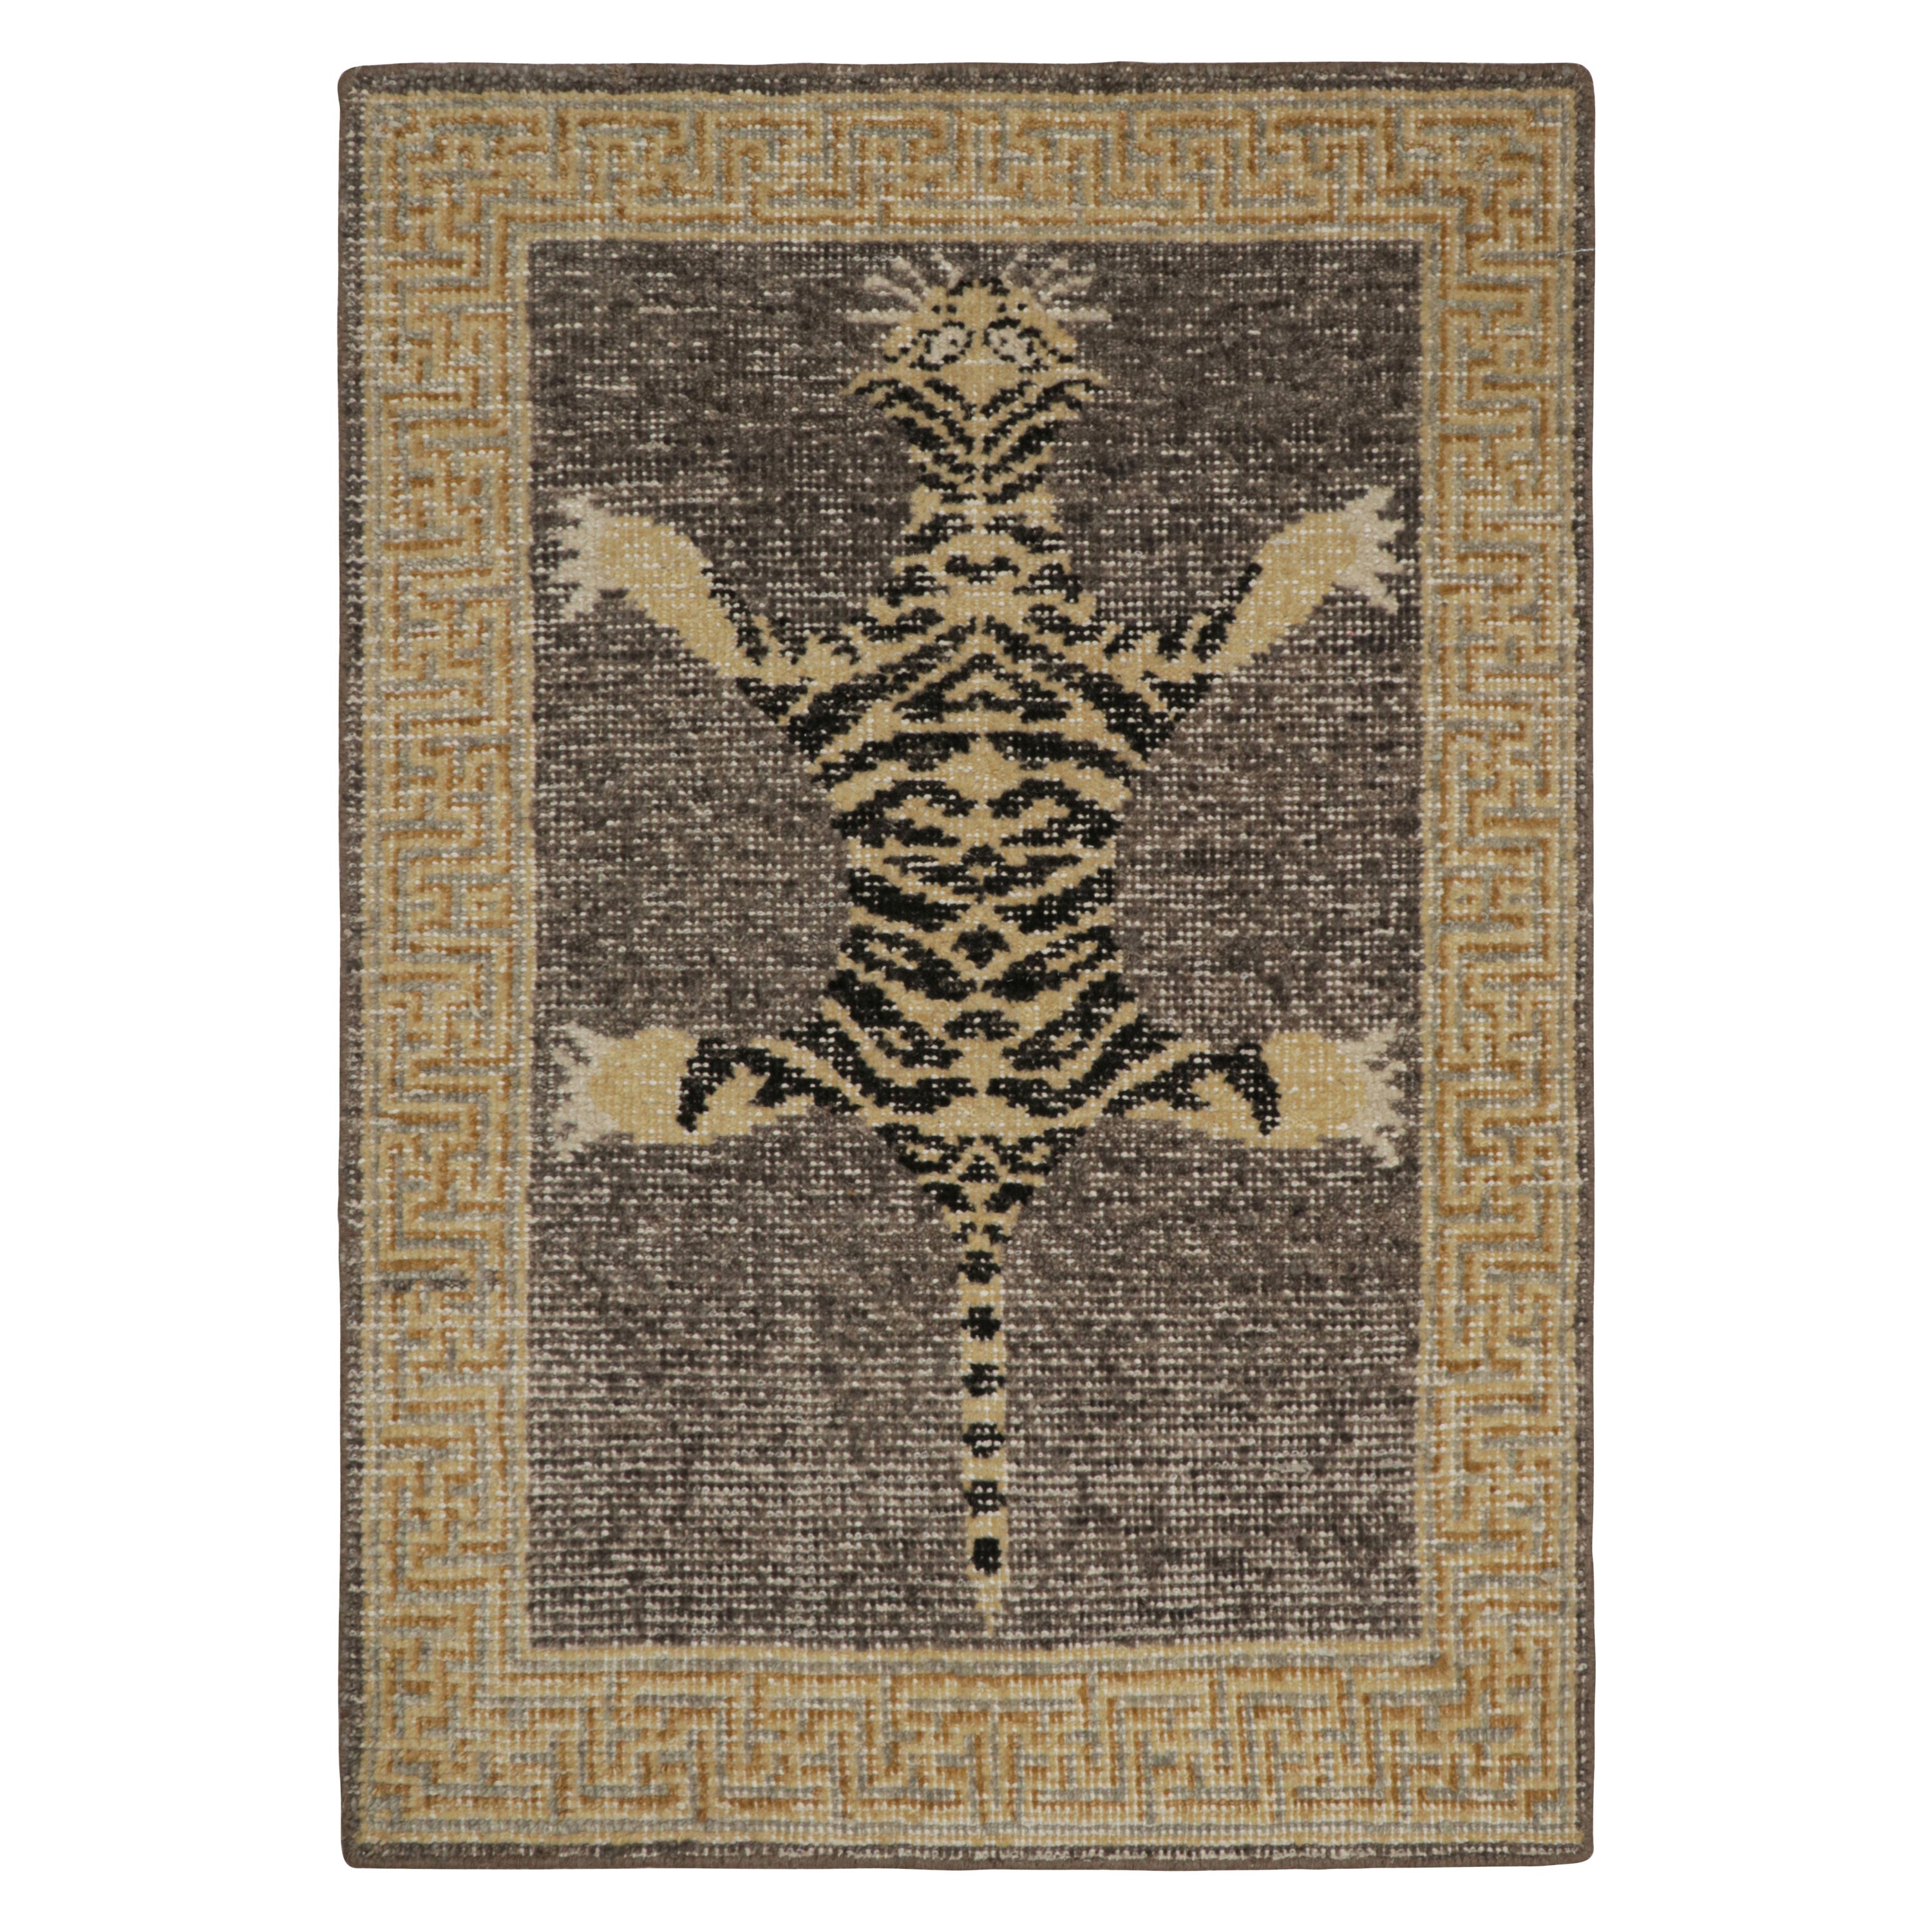 Rug & Kilim’s Modern Tiger Skin Accent Pictorial Rug in Gray, Beige and Black 